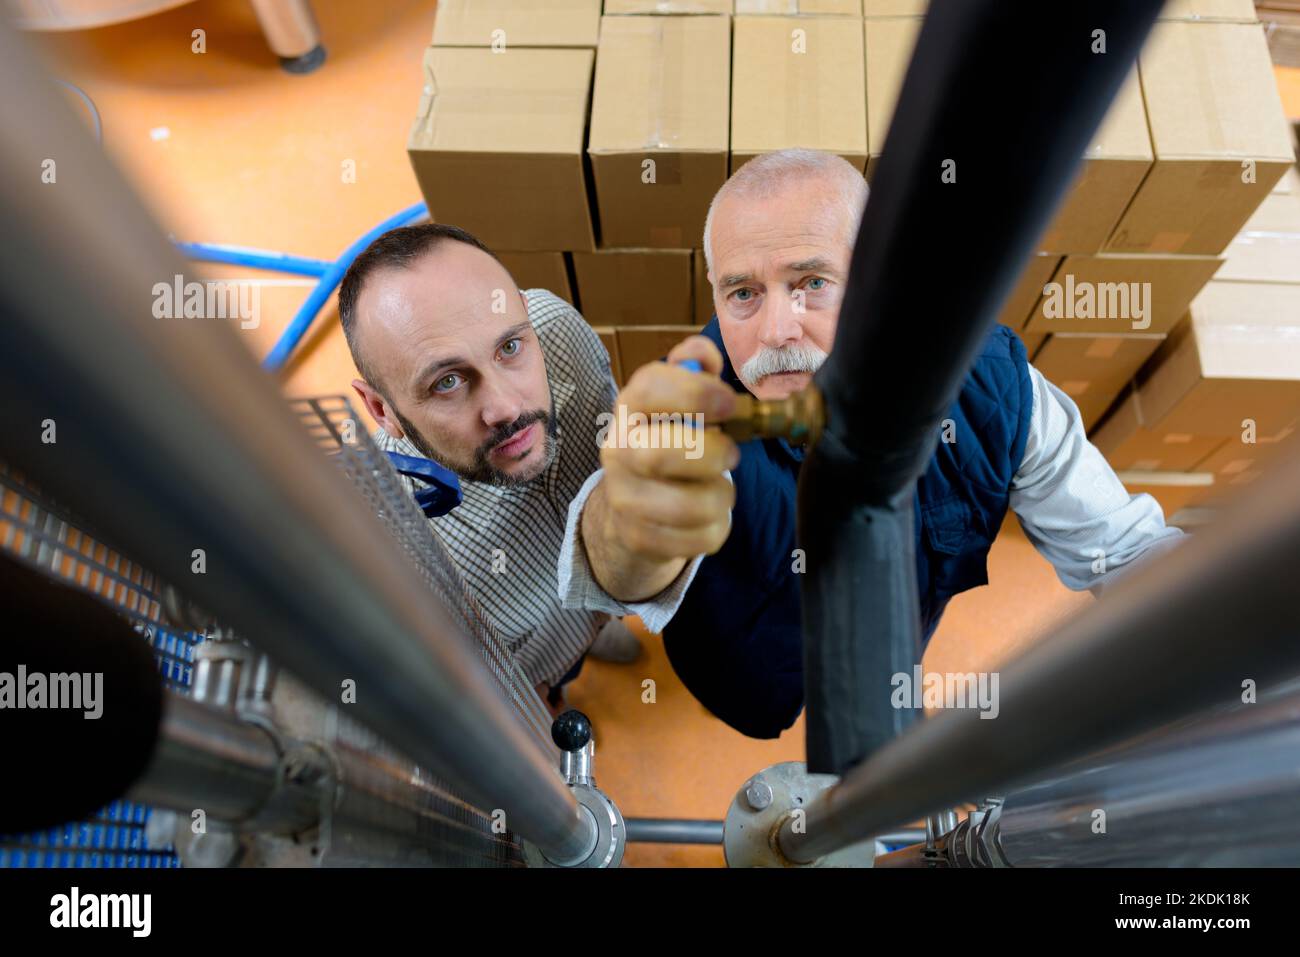 close up of workers loading forklift Stock Photo